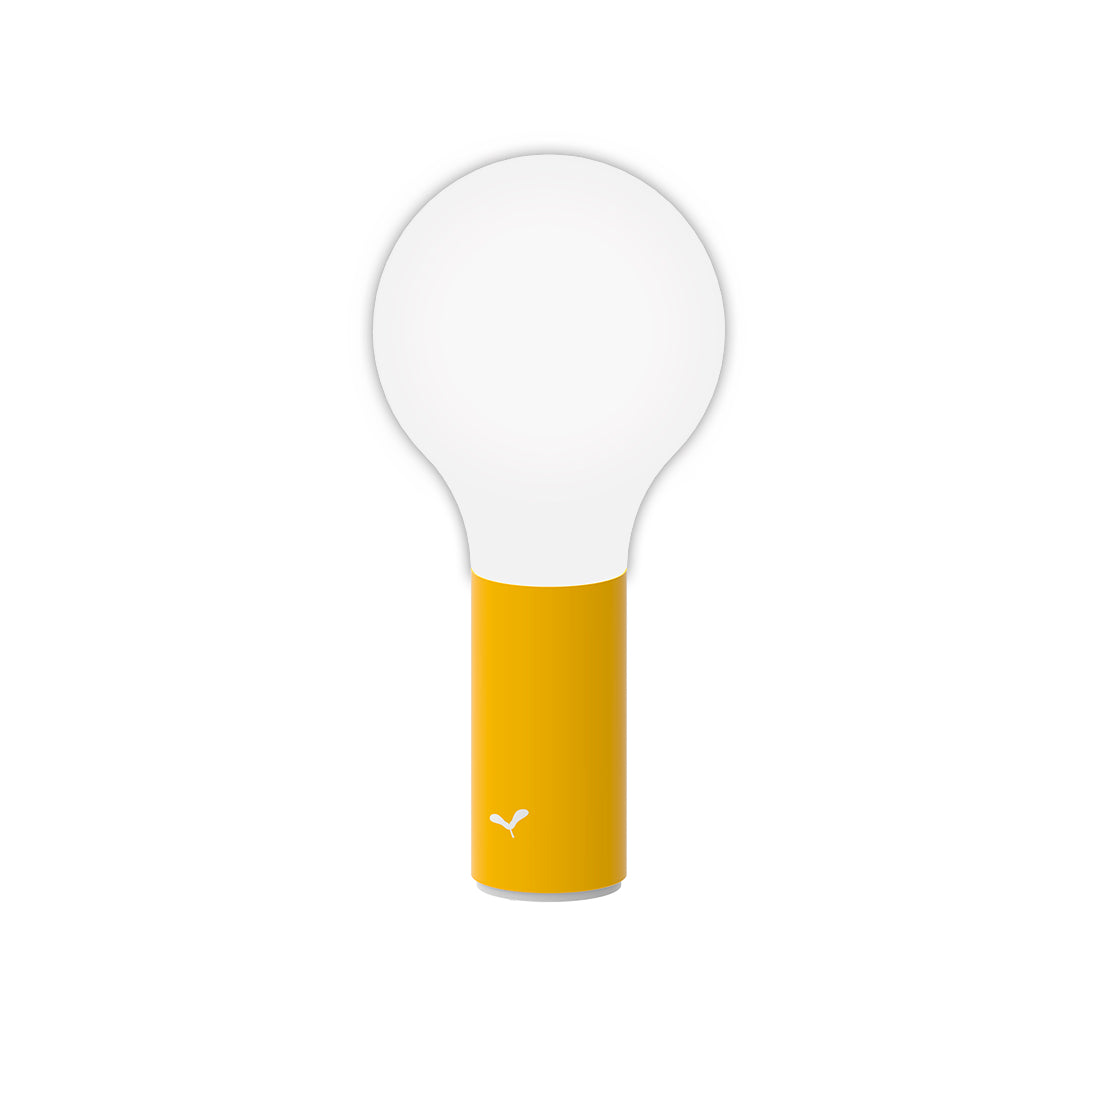 Fermob Aplô portable indoor and outdoor Lamp in Honey in front of a white background.